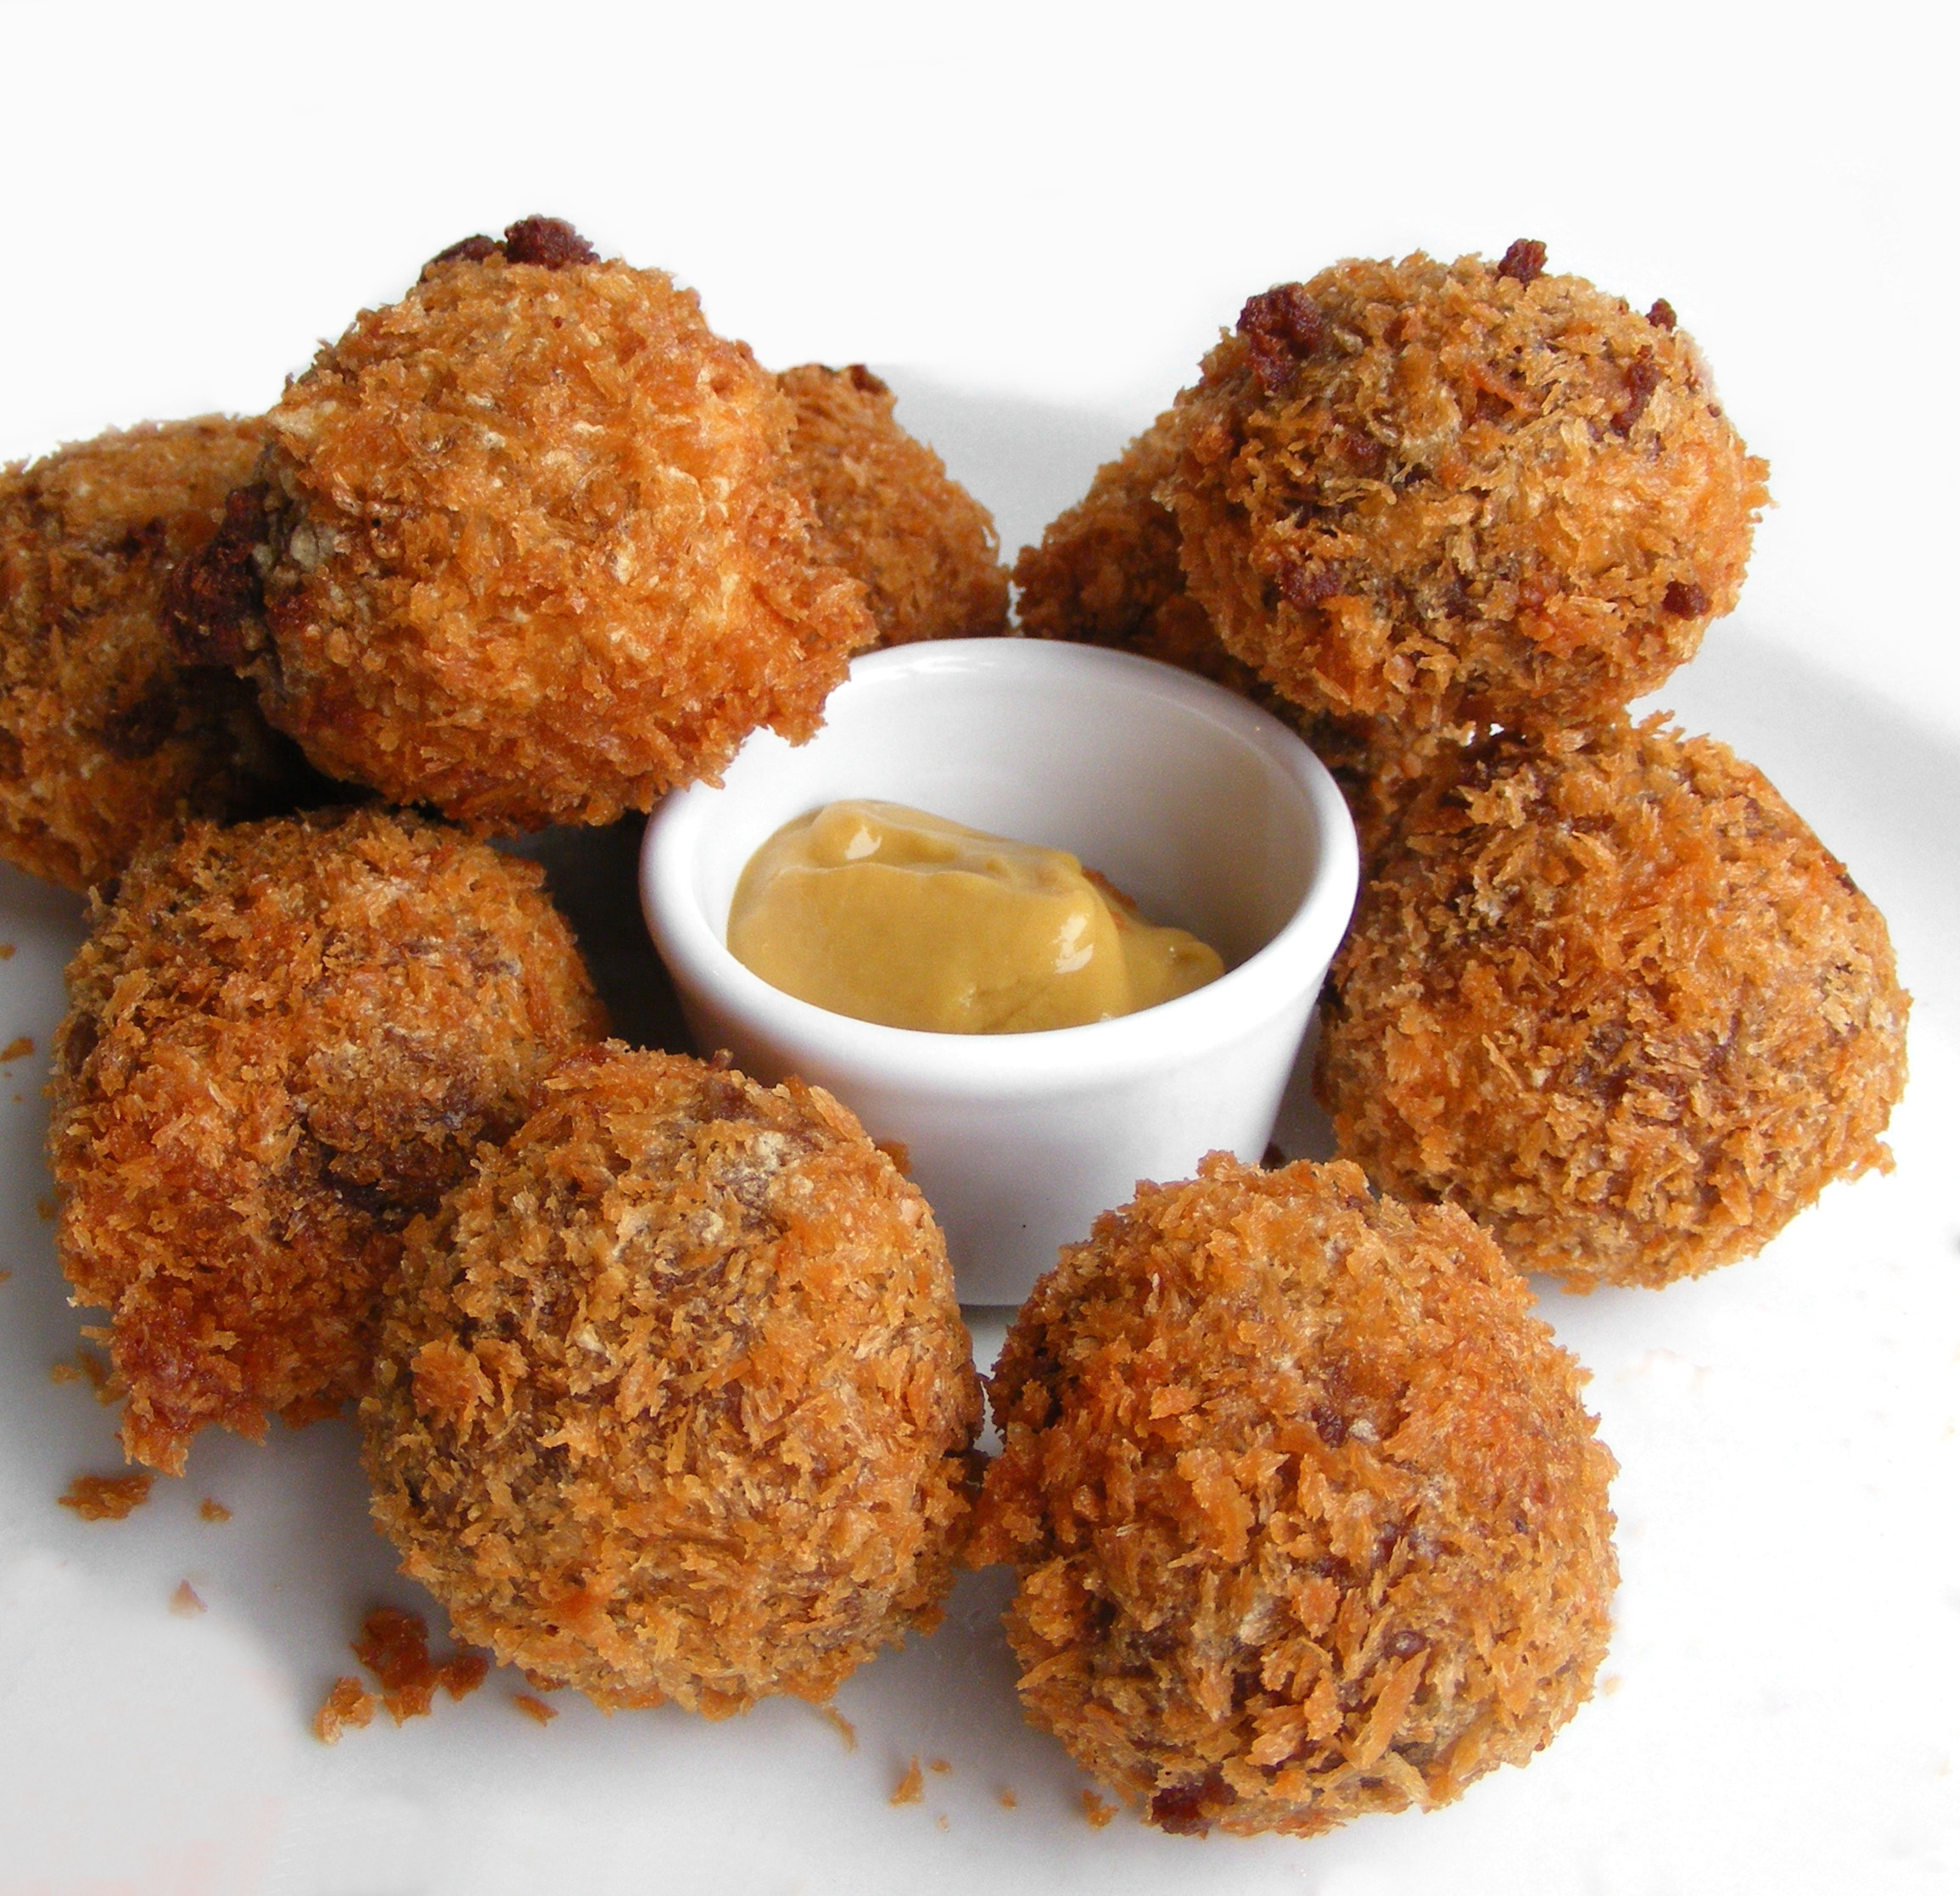 A famous Dutch fried snack called bitterballen, served with mustard